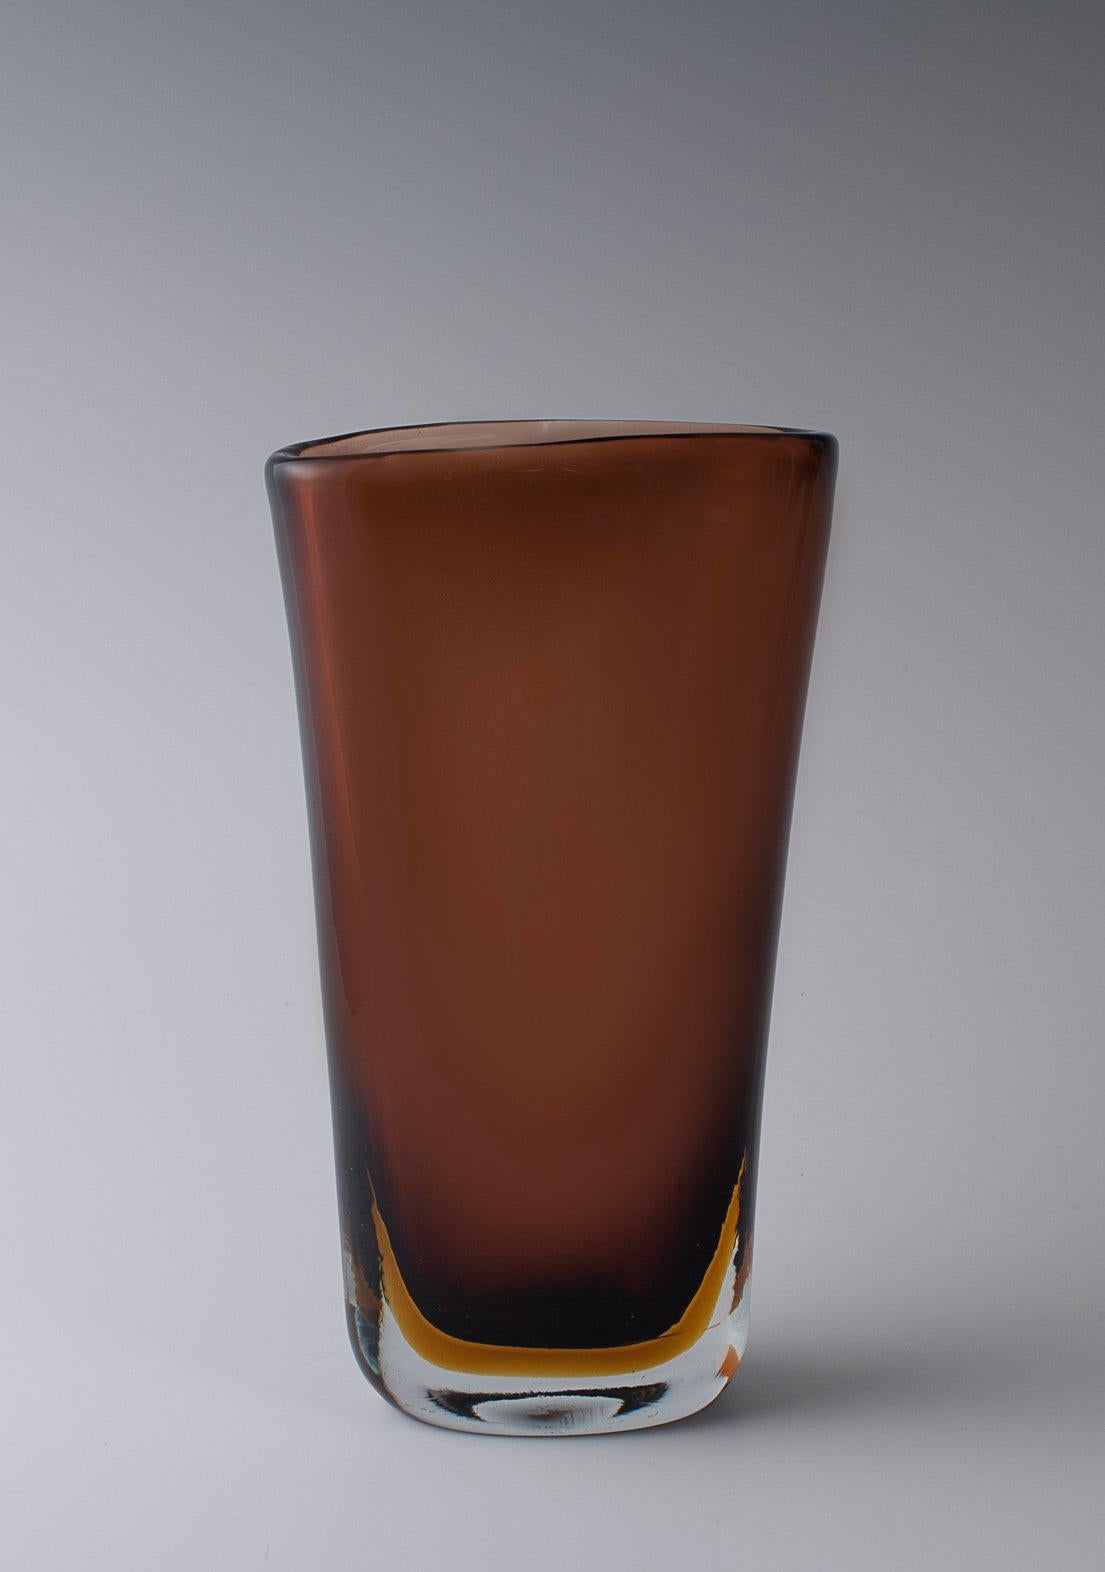 Blown glass vase submerged and handmade in amber.
Measures: 27 cm height, diameter 15 cm,
early 1960s.
Acid signed 'Venini Murano, Italy.'
Excellent condition.